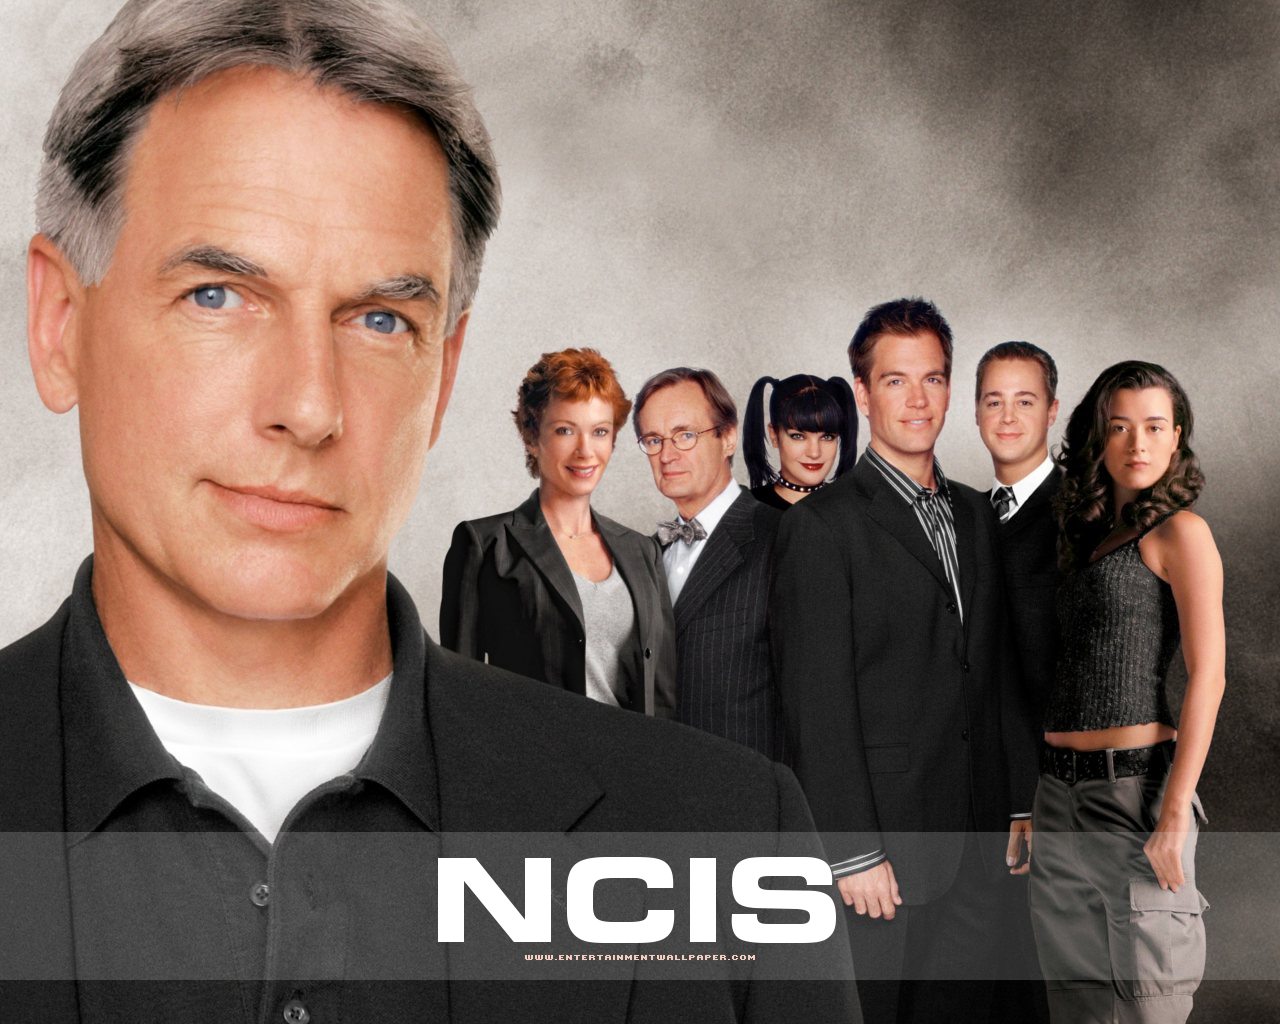 Buzz Ncis Spin Off Gets Juicy Cast Additions